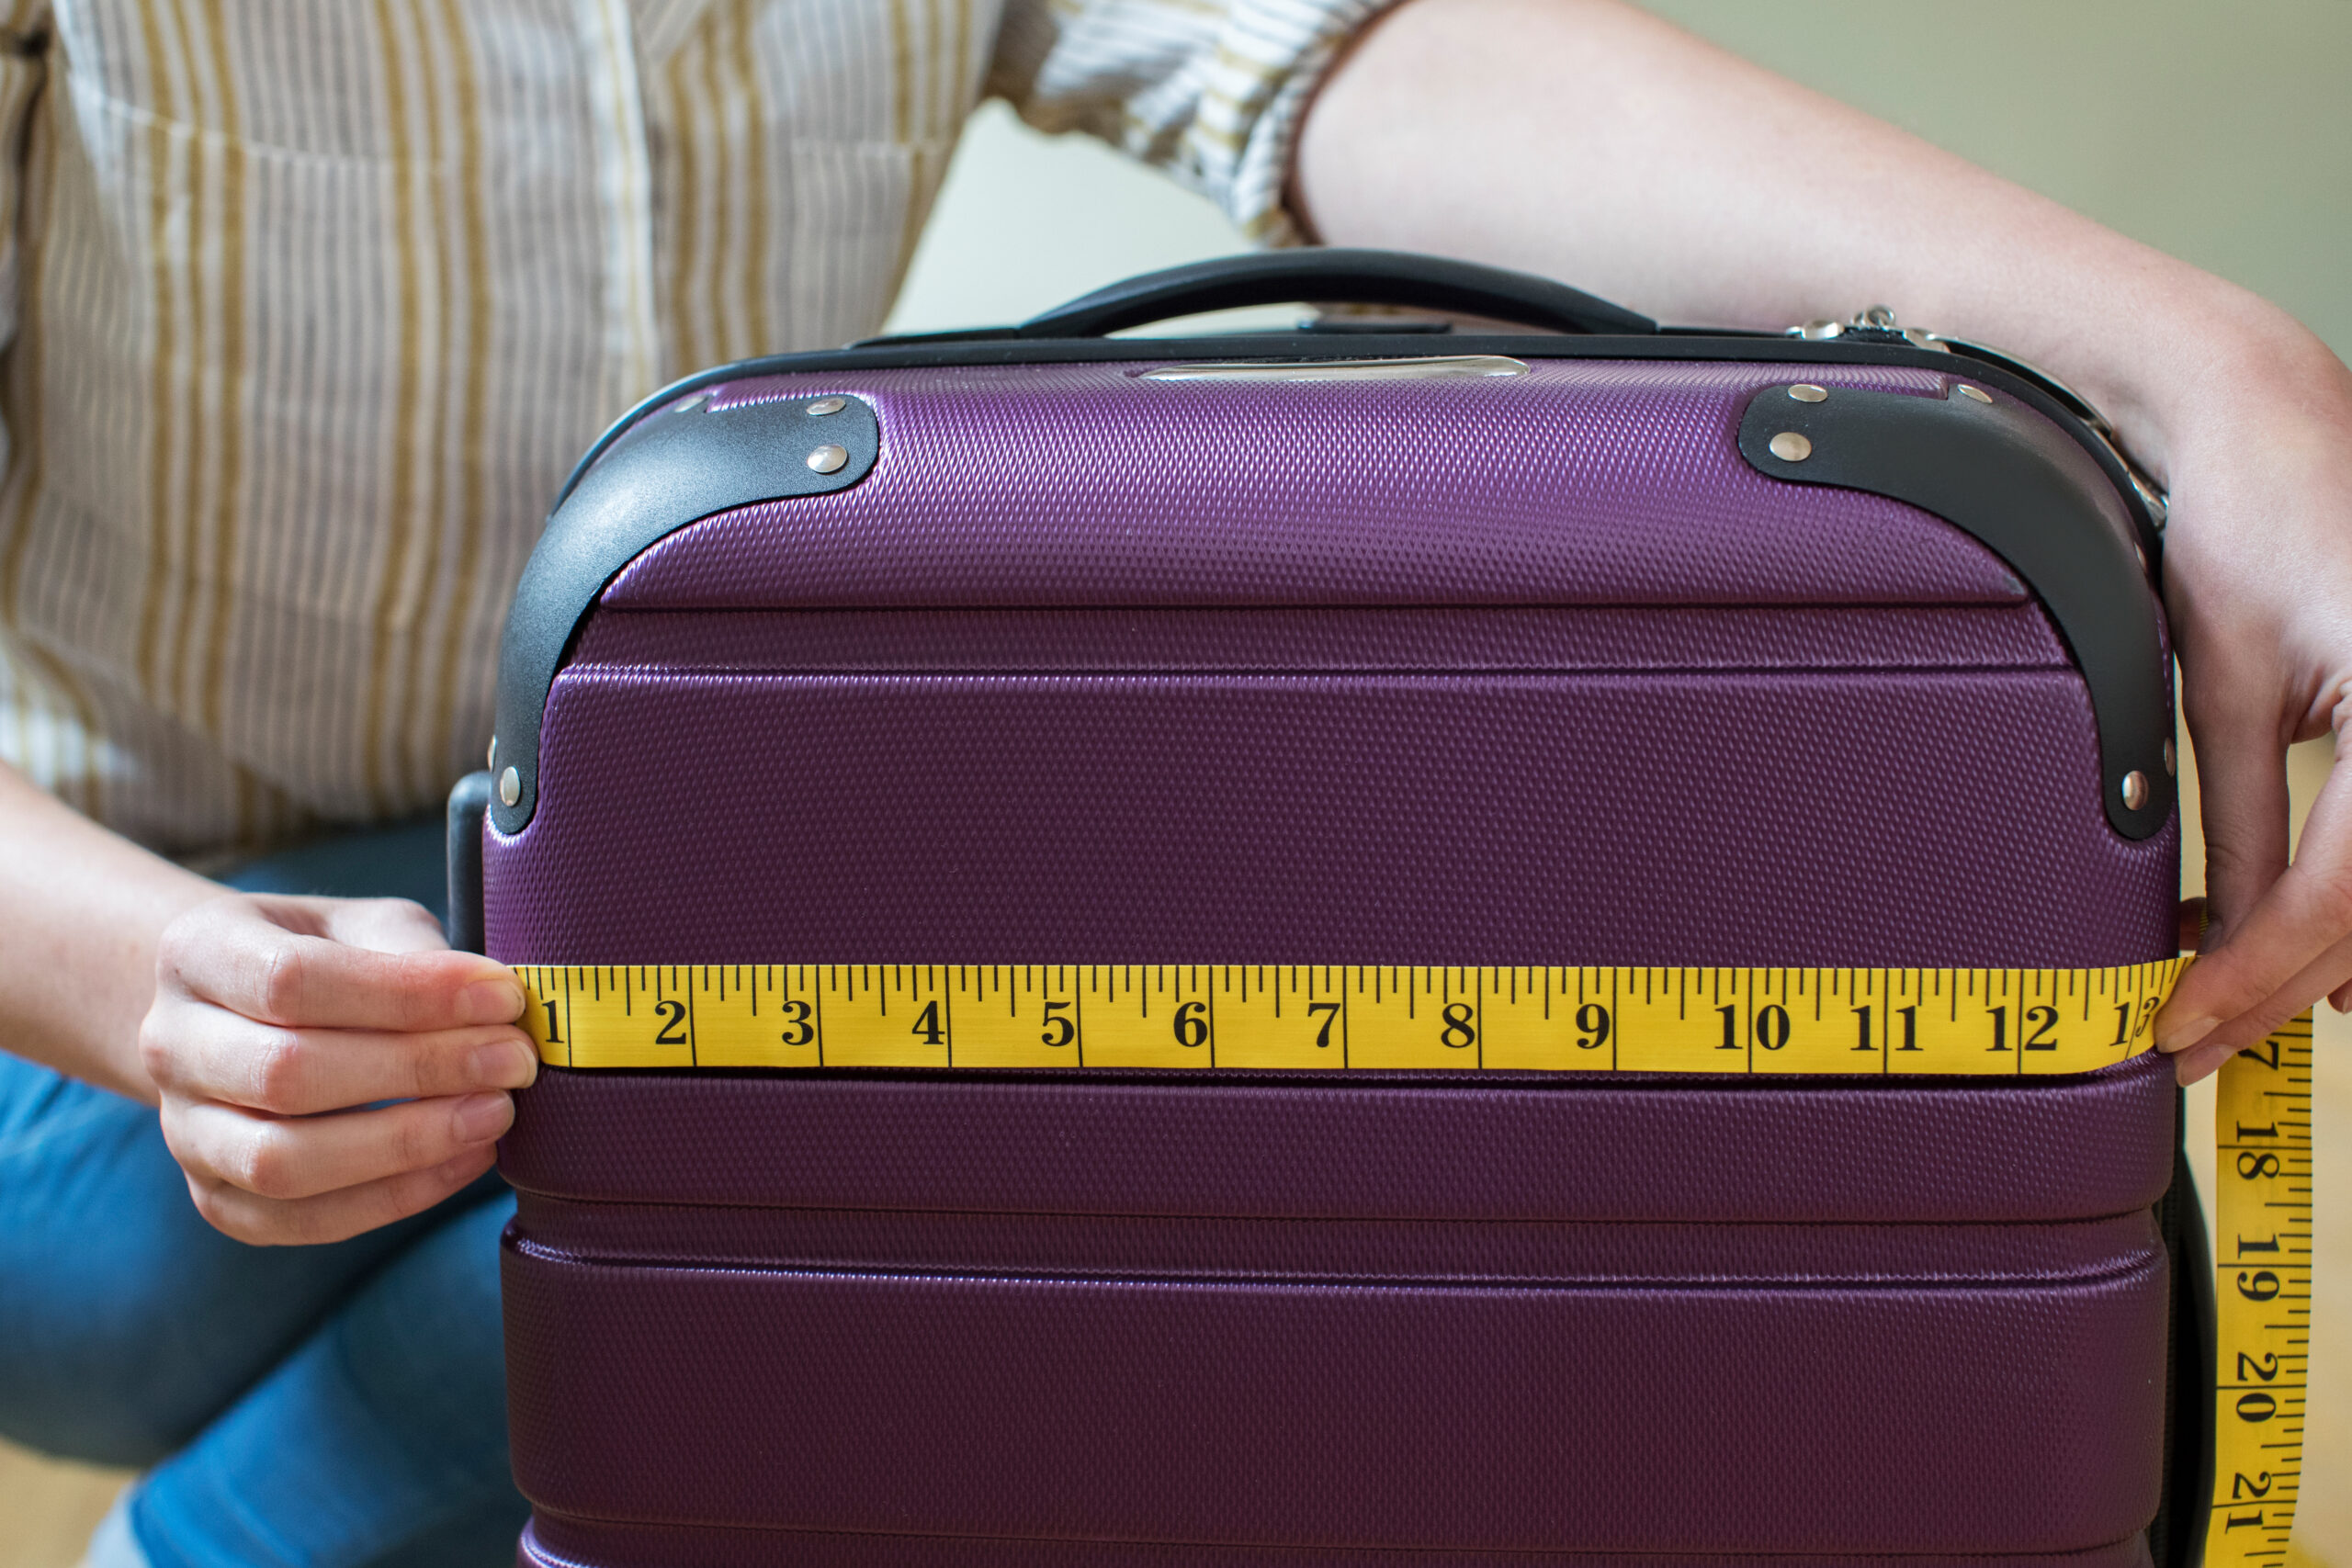 New guidelines proposed for size of carry-on luggage 